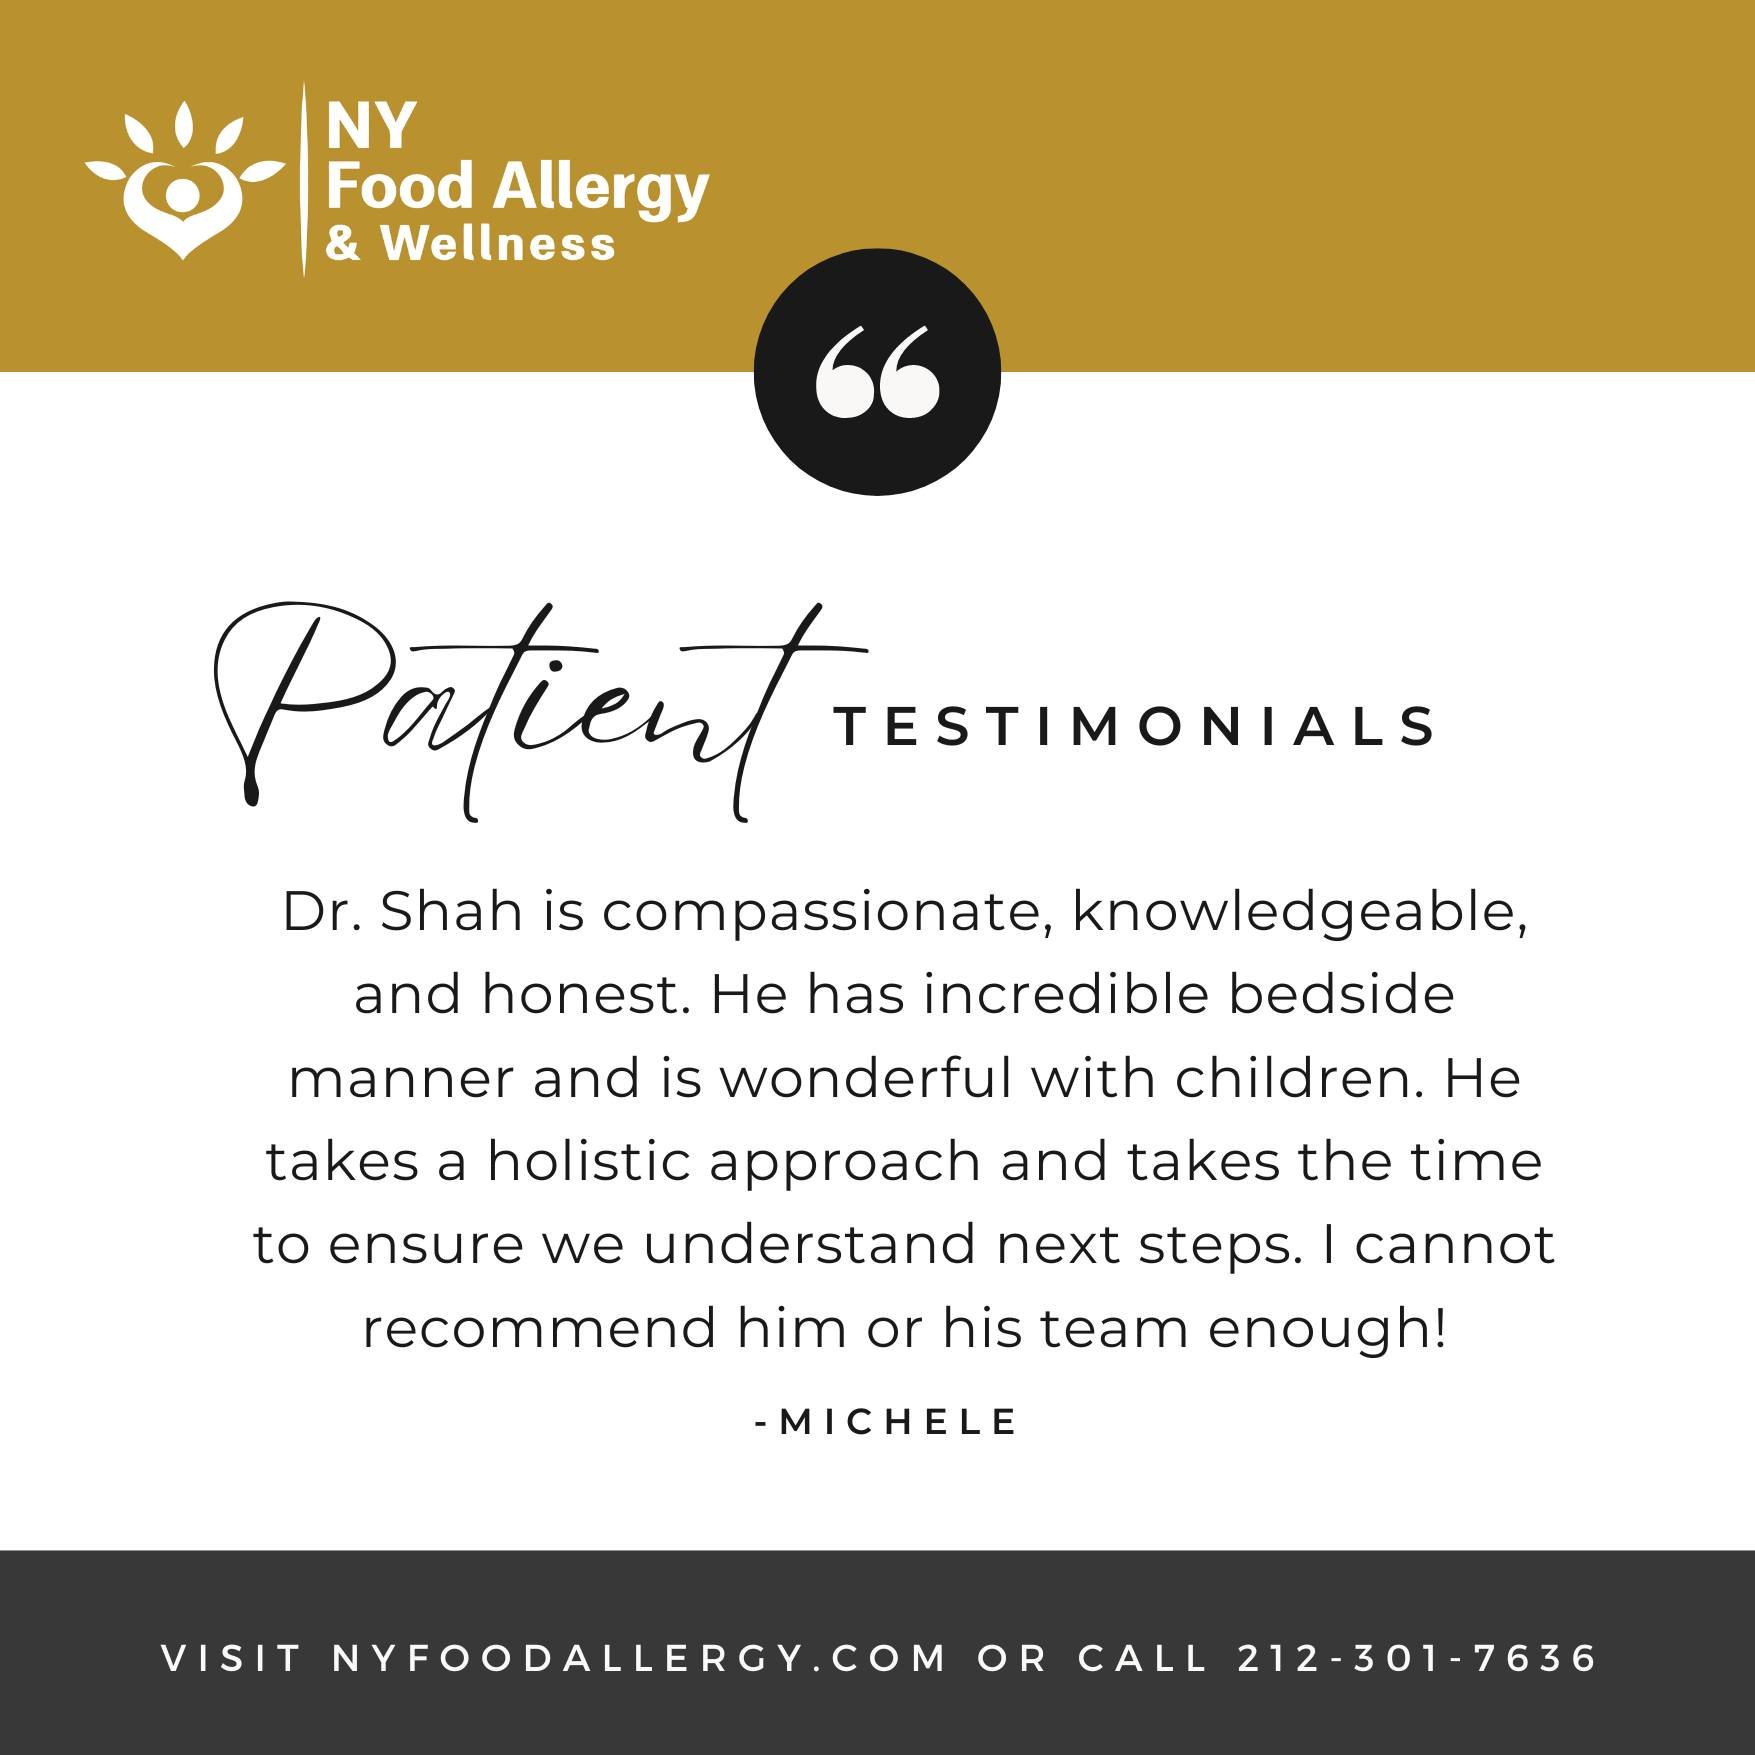 Discover the compassion and expertise that define NY Food Allergy &amp; Wellness through the words of those who have experienced it first-hand. ✨ Michele shares her journey with Dr. Shah, highlighting his holistic approach, dedication, and the except